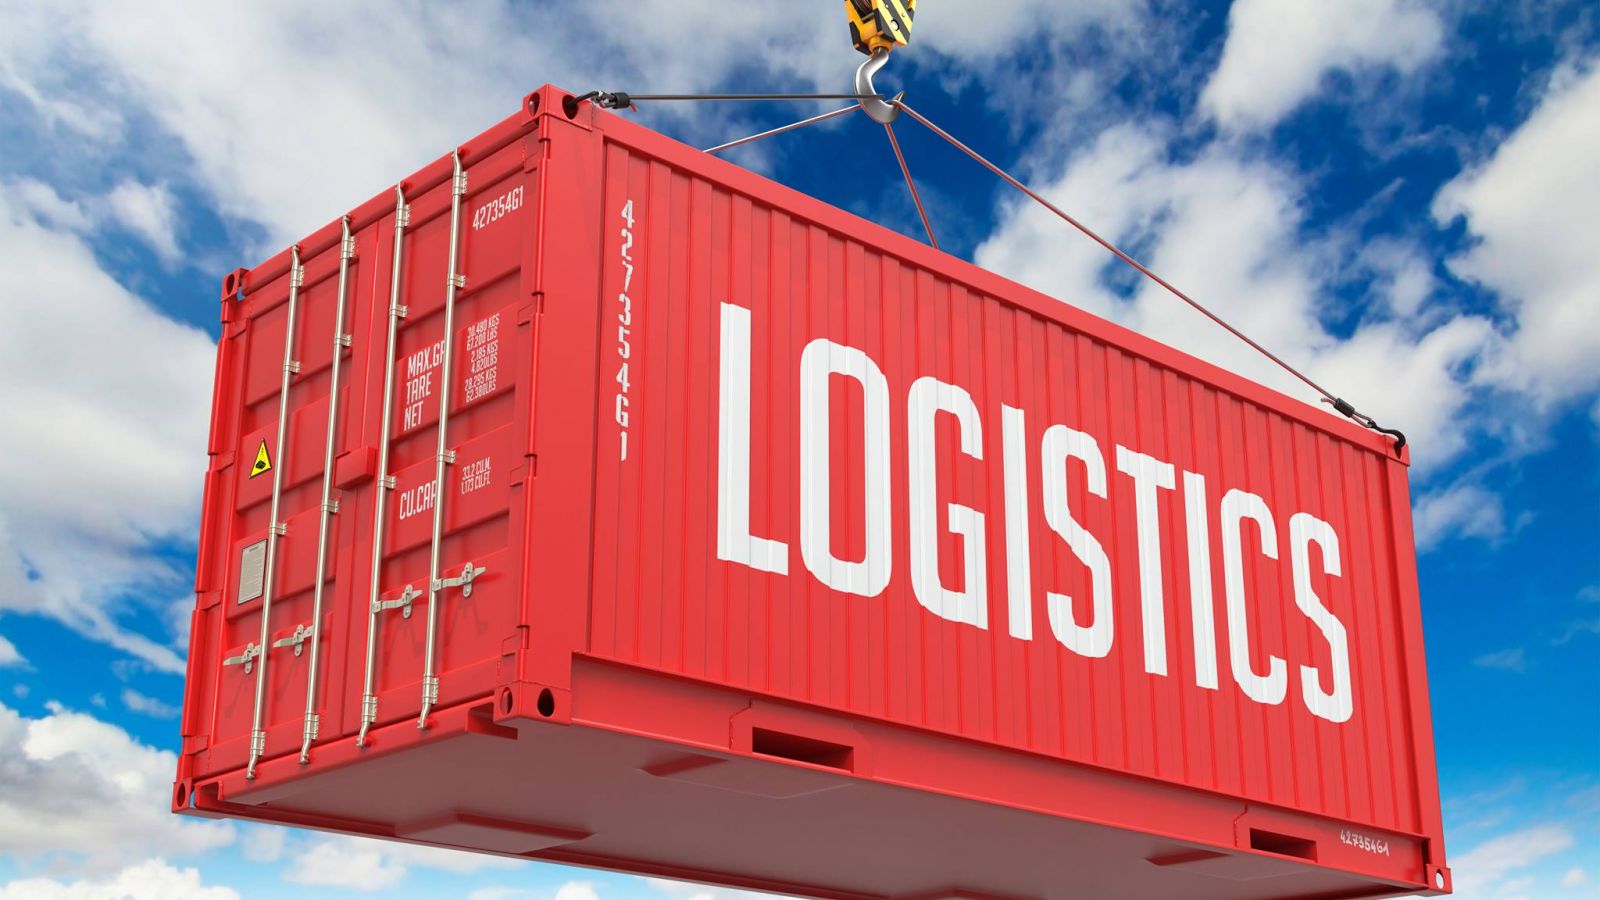 Vietnams’ logistics service has reached a relatively high growth rate over recent time, rising from 12% to 14%.